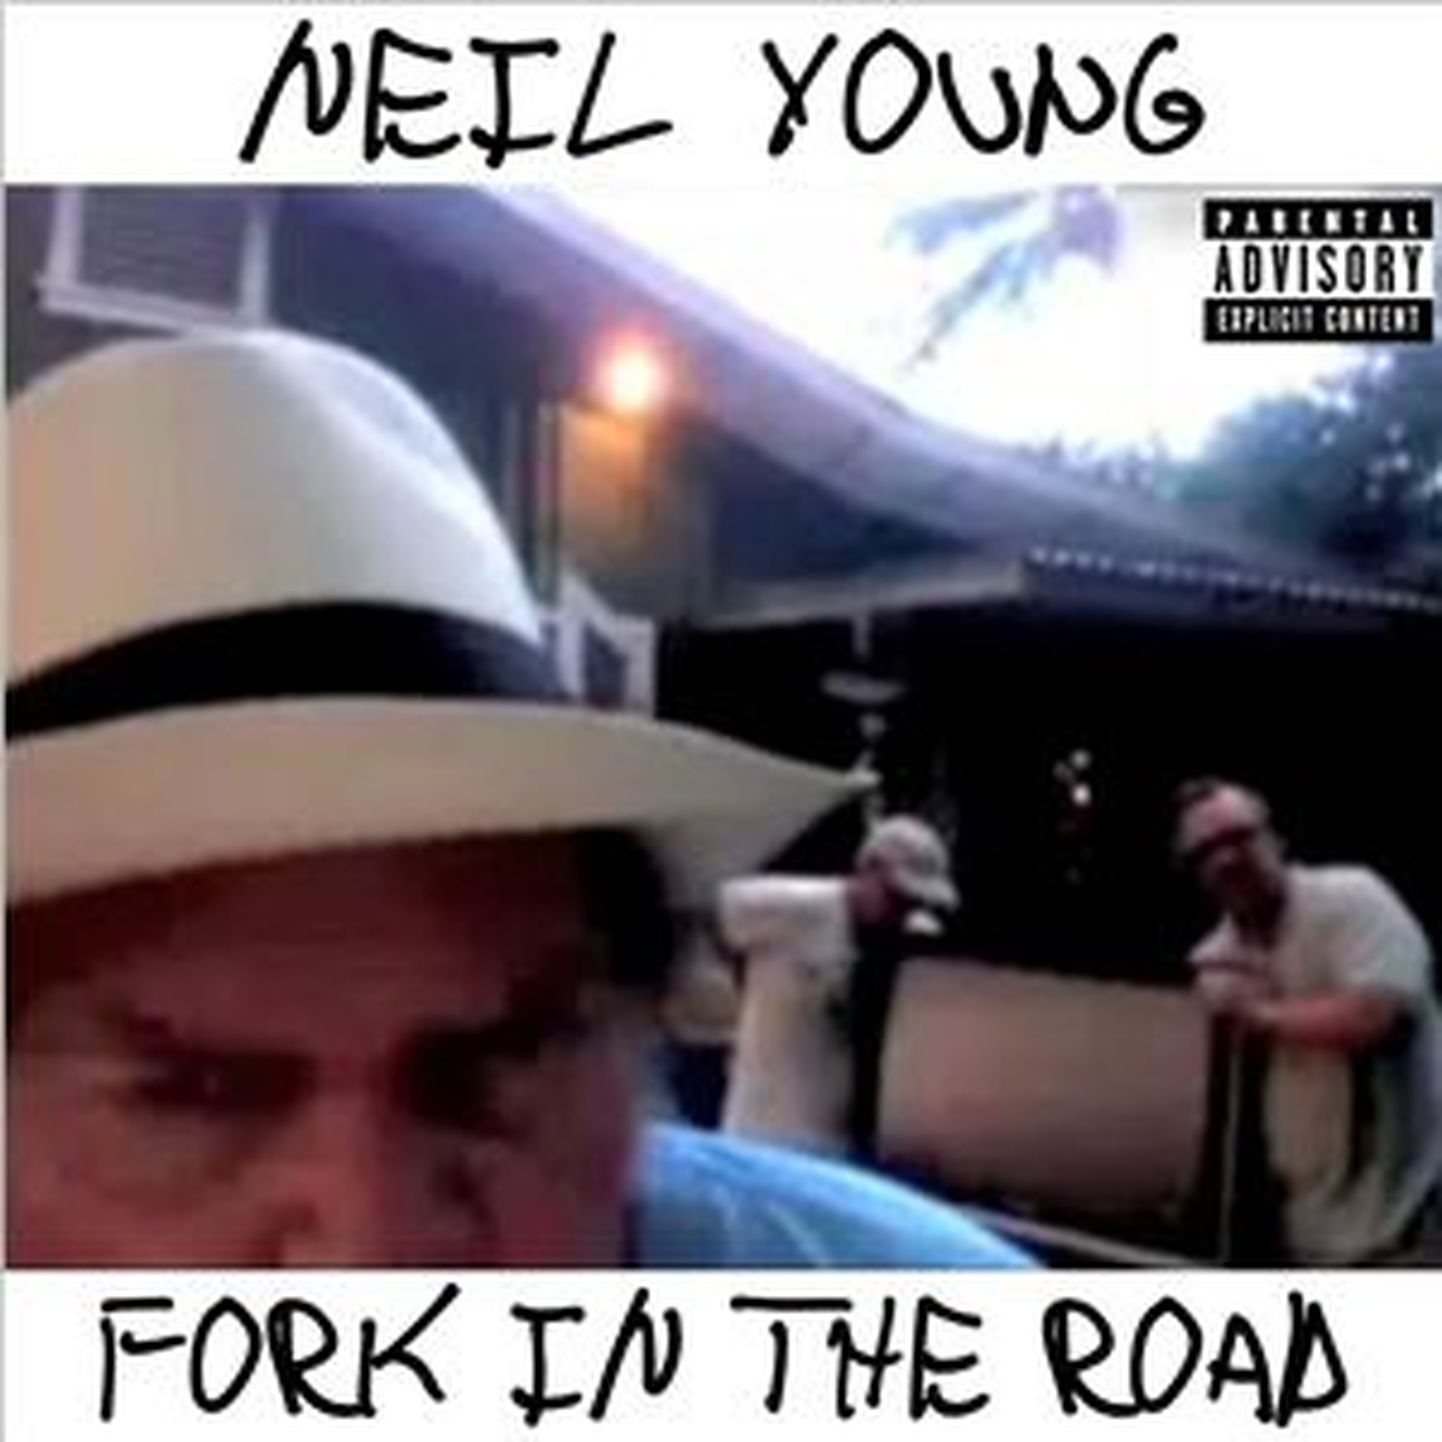 Neil Young “Fork In The Road”.